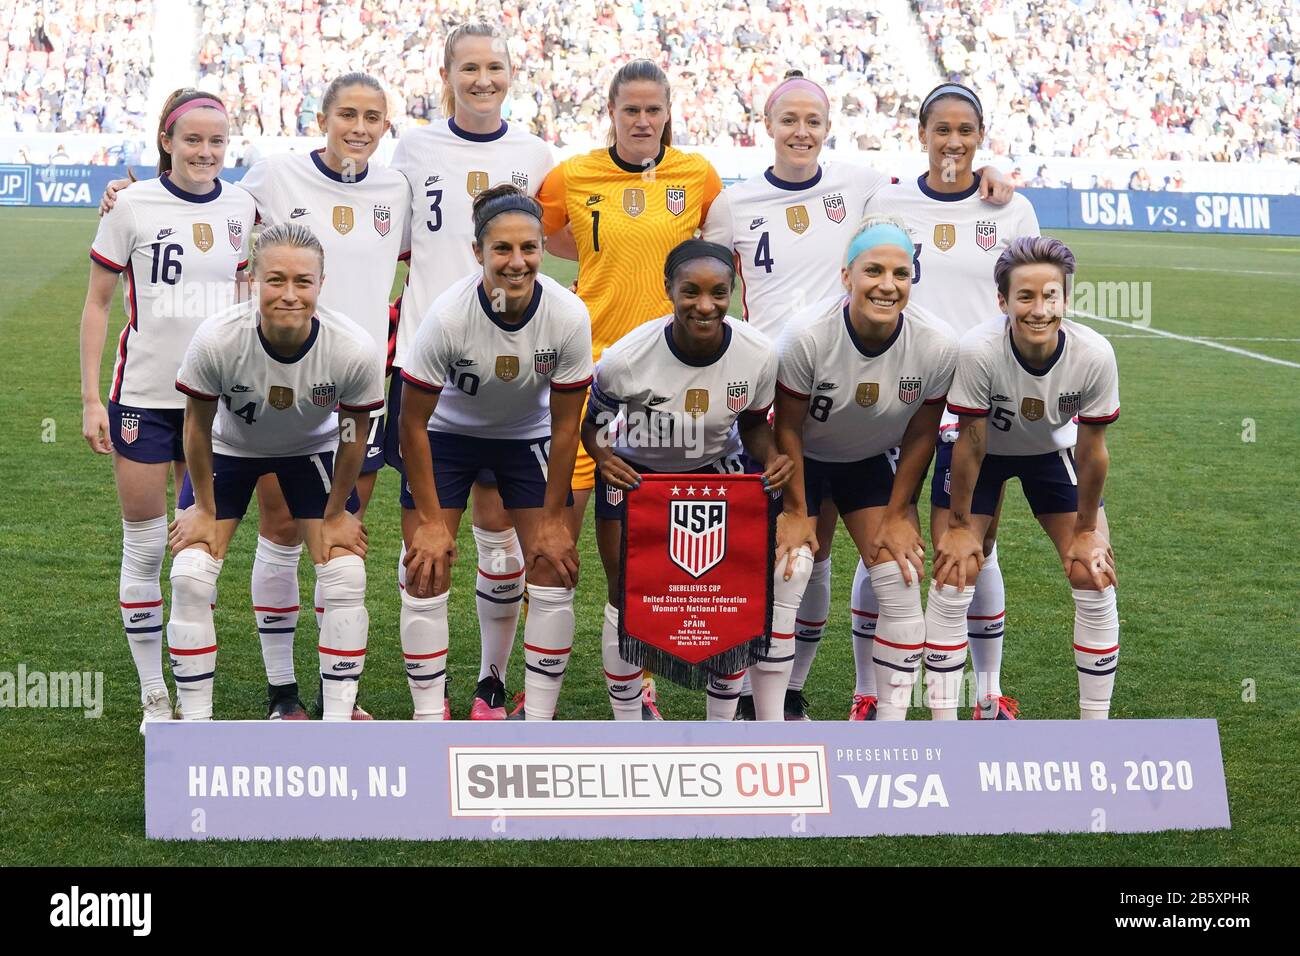 Harrison, New Jersey, USA. 08th Mar, 2020. USA women's players pose for a team photo before match against Spain in the SheBelieves Cup. at Red Bull Arena, Harrison, NJ on Sun. Mar. 8, 2020. Front row (from left) Emily Sonnett, Carli Lloyd, Crystal Dunn, Julie Ertz and Megan Rapinoe. Back row(from left) Rose Lavelle, Abby Dahlkemper, Samantha Mewis, Alyssa Naeher, Becky Sauerbrunn and Lynn Williams. (Photo by IOS/ESPA-Images) Credit: European Sports Photographic Agency/Alamy Live News Stock Photo